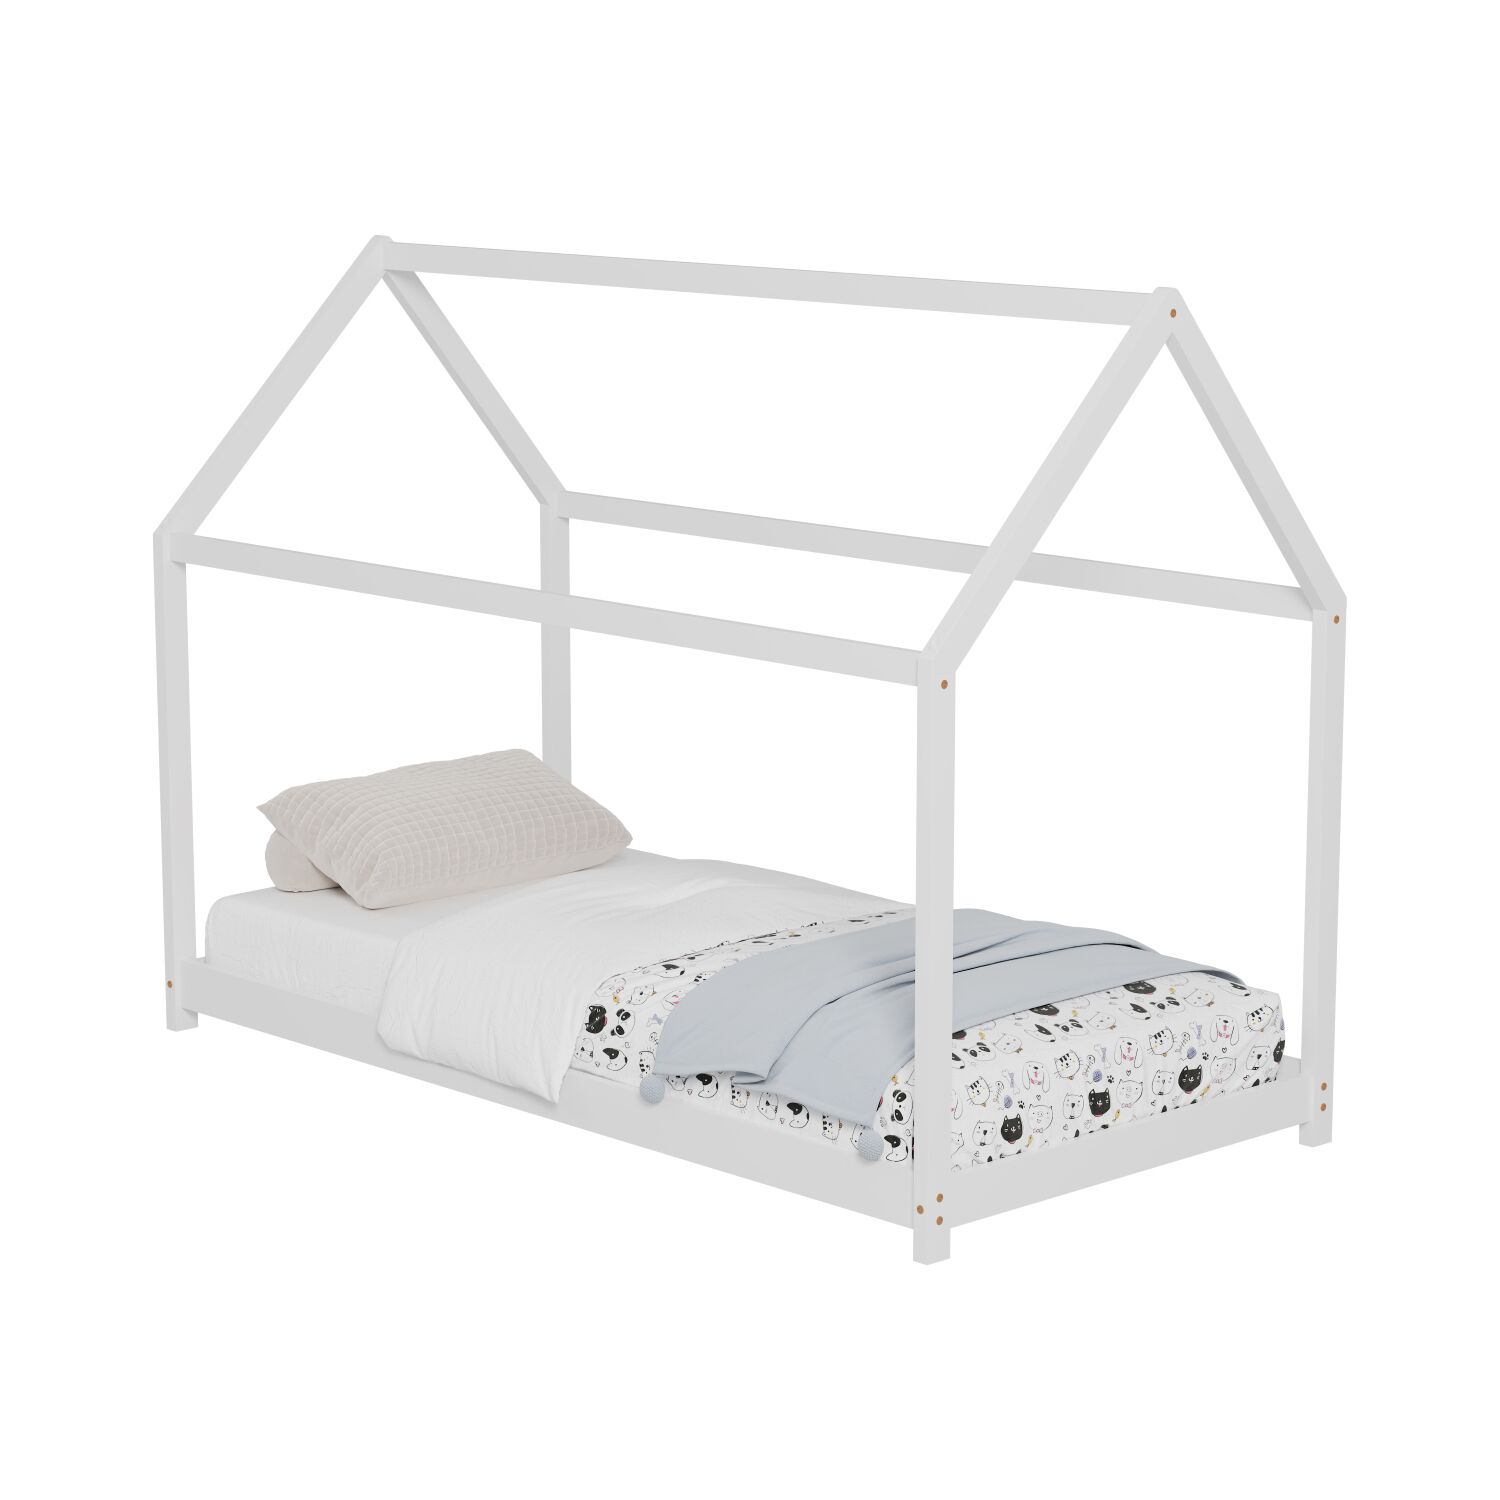 BED FOR KIDS PEPE HM678.03 t.MONTESSORI SOLID PINE WOOD IN WHITE- 140x70cm.